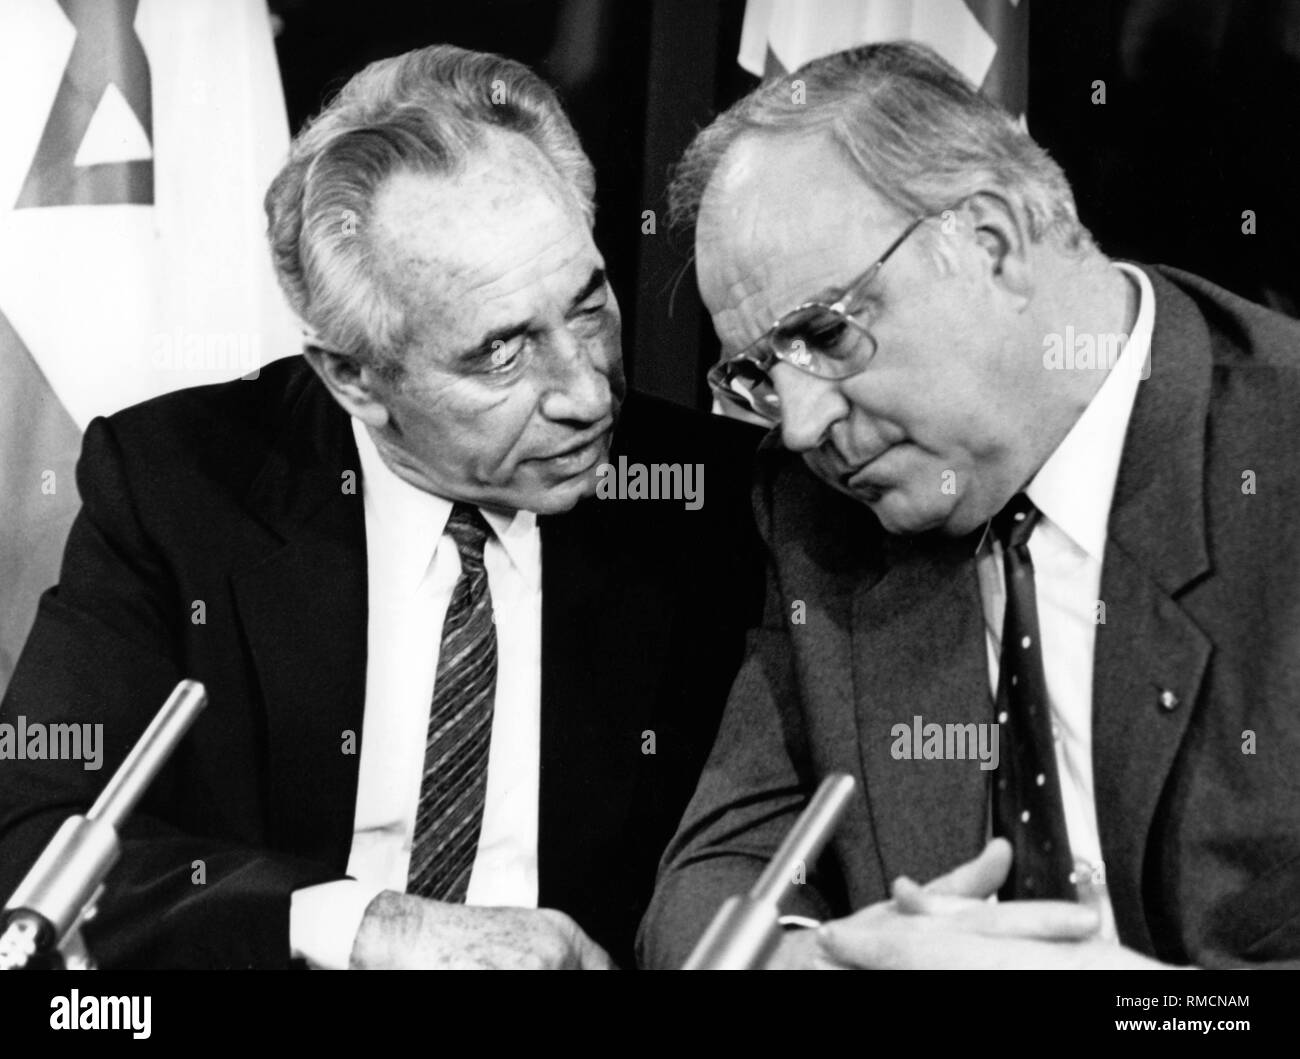 Israeli Prime Minister Shimon Peres and West German Chancellor Helmut Kohl in conversation. Probably during a press conference. Stock Photo